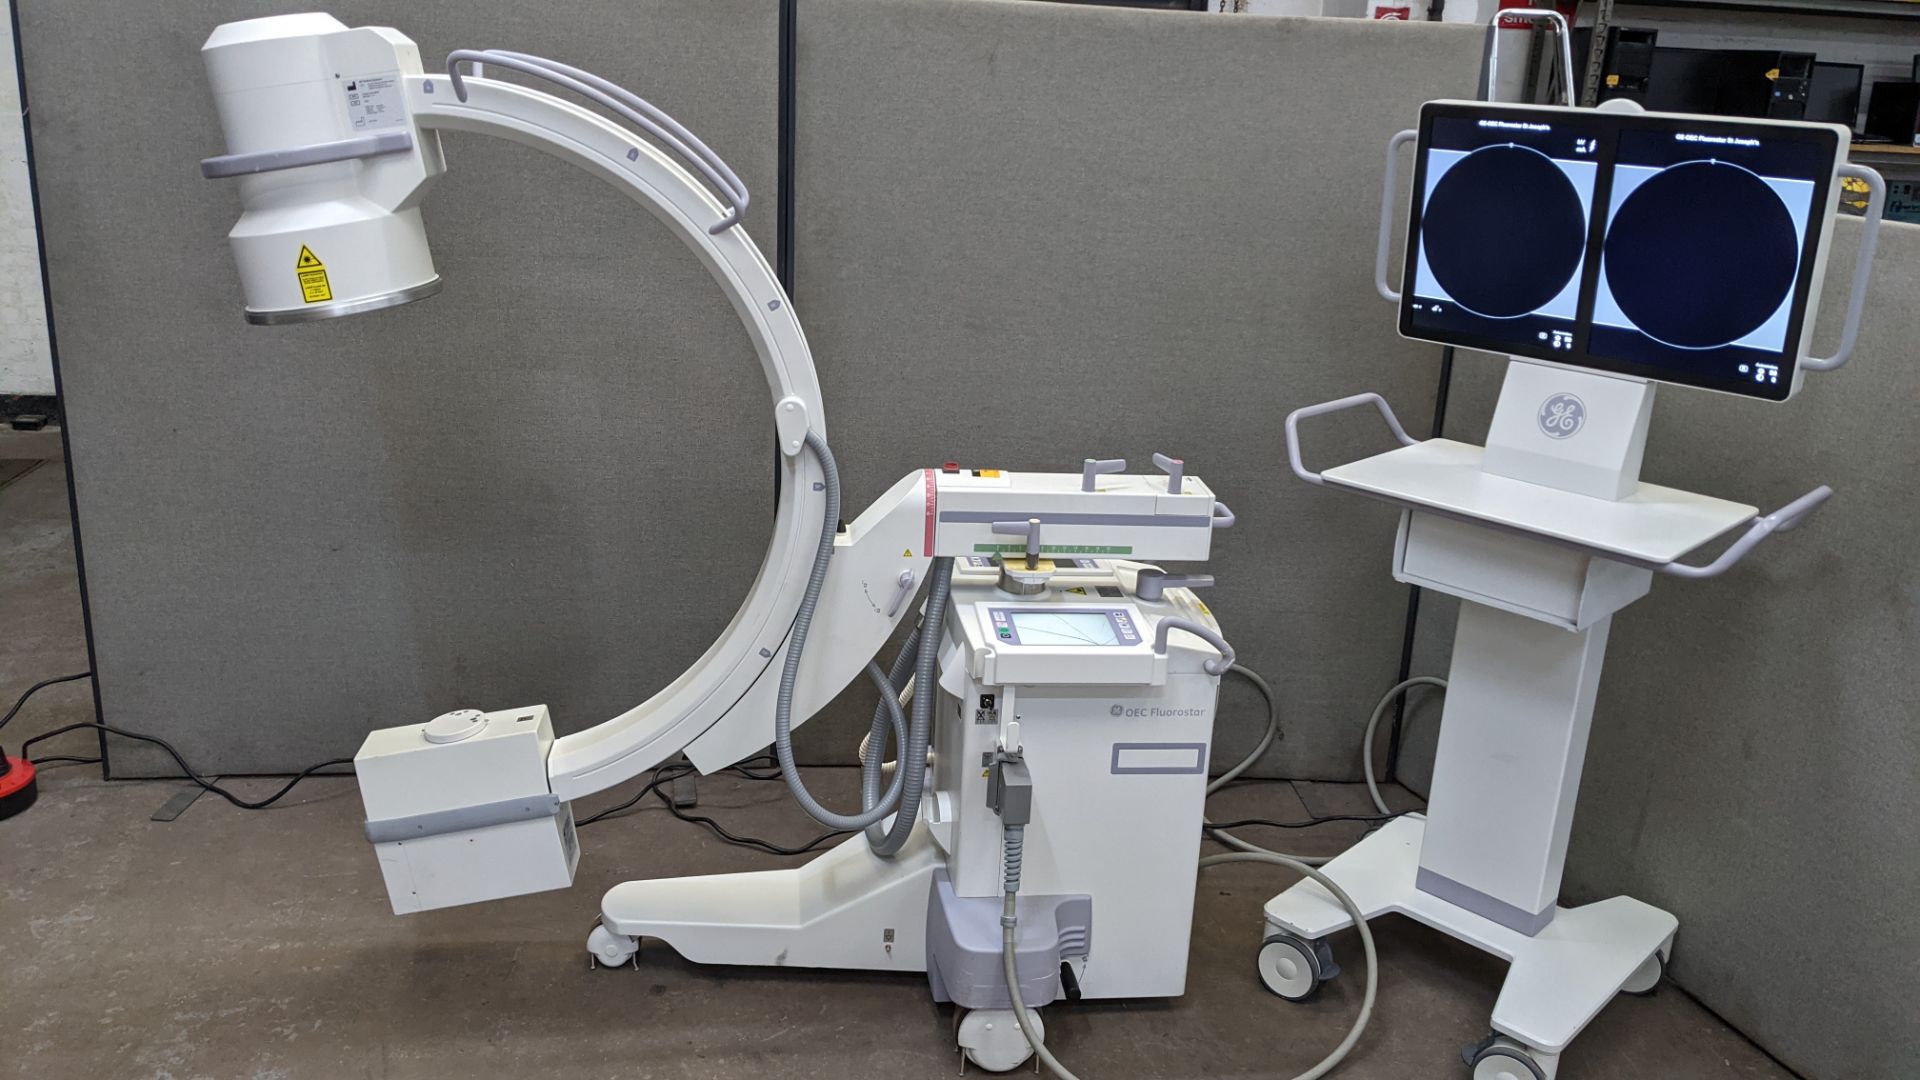 GE-OEC Fluorostar imaging system, purchased new in August 2017. EO4 Series. - Image 6 of 68